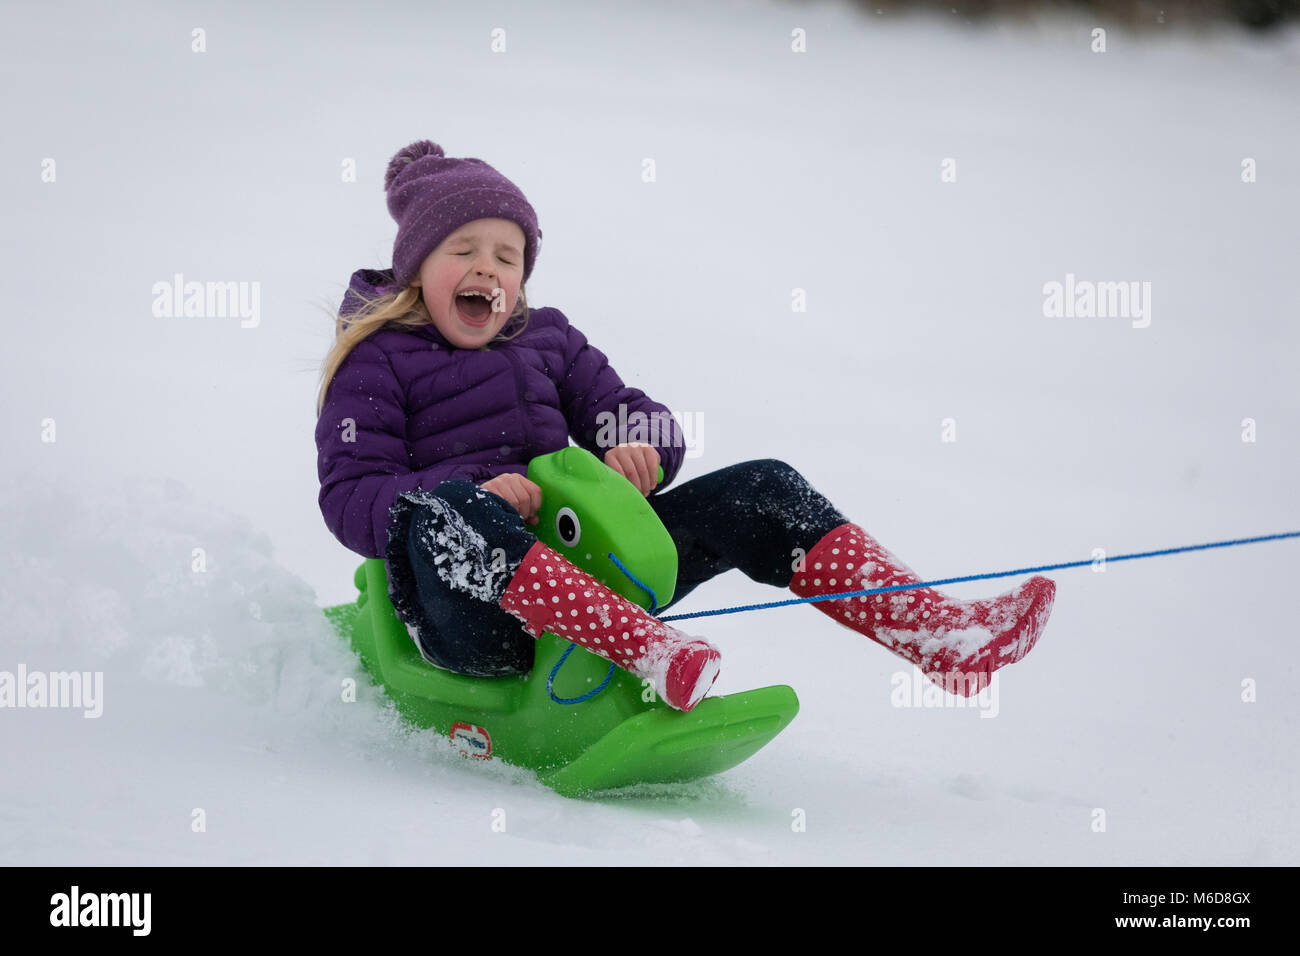 Pembrokeshire, Wales, 2nd March 2018. Children having fun sledding in the snow in Pembroke, Pembrokeshire, Wales, UK Credit: Drew Buckley/Alamy Live News Stock Photo